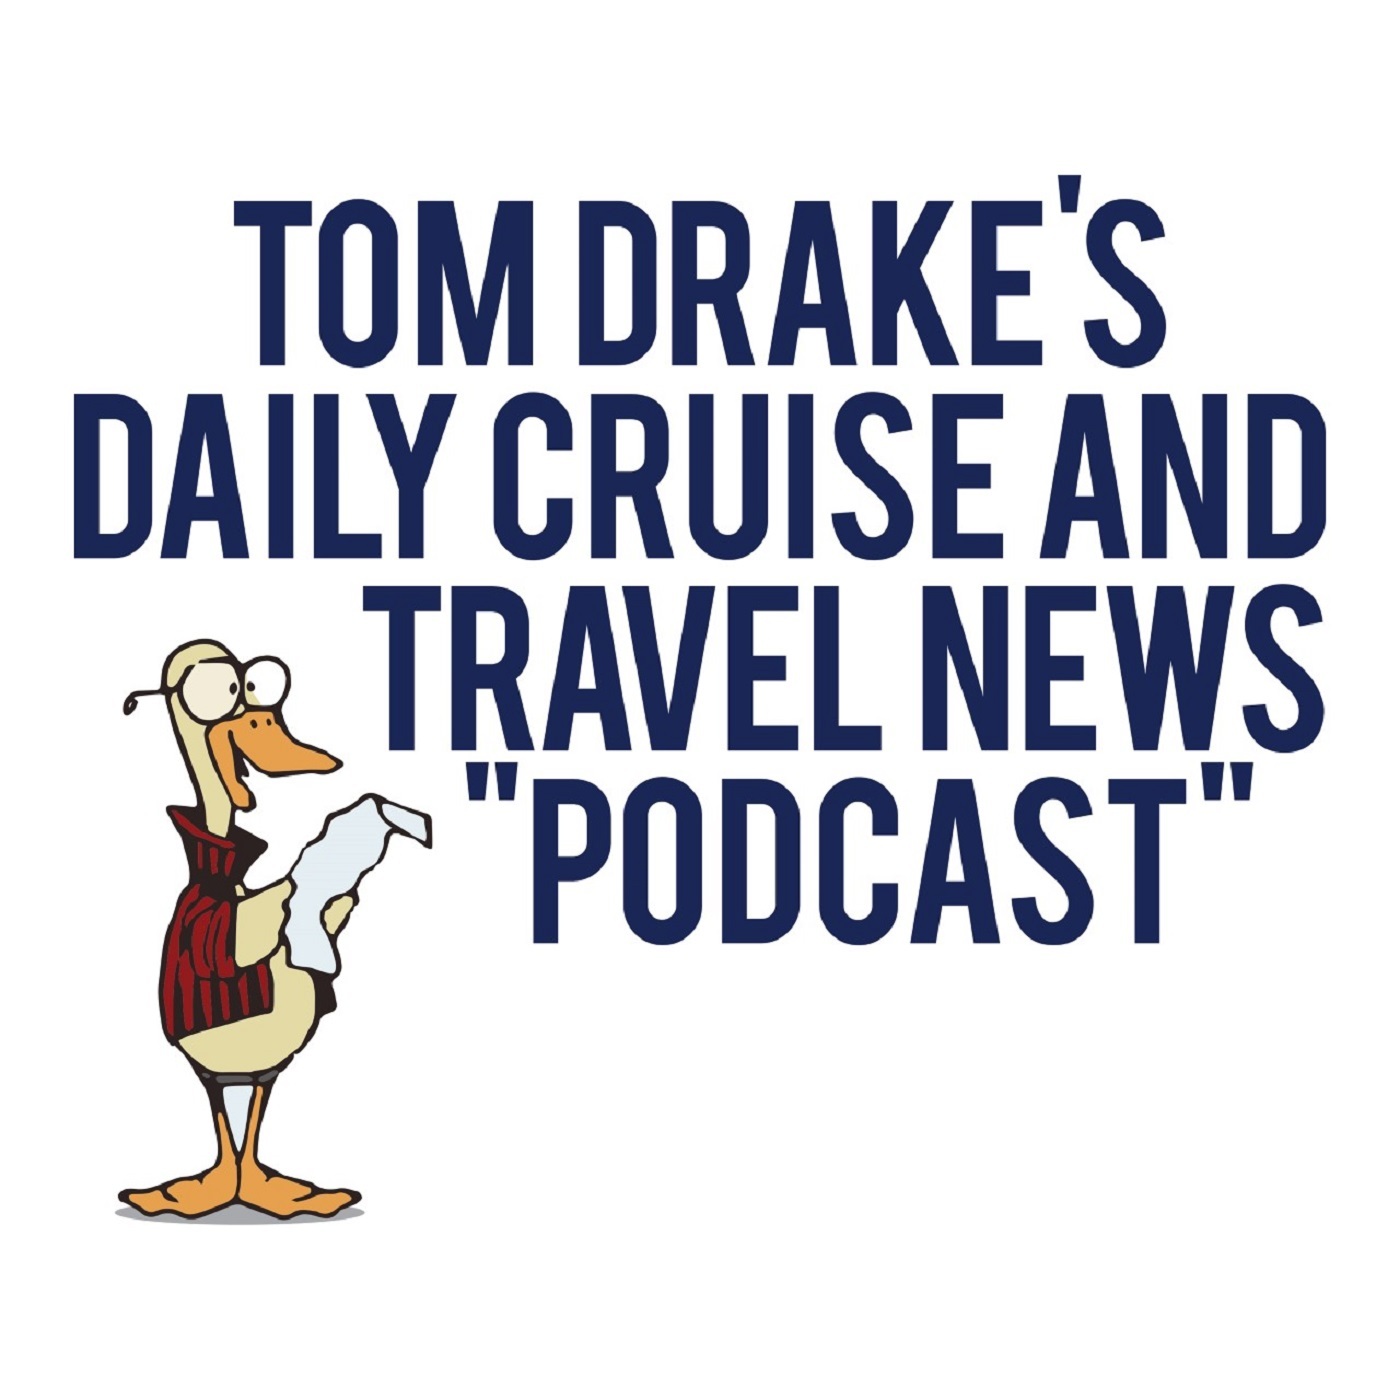 The Daily Cruise and Travel News "Podcast" with Tom Drake